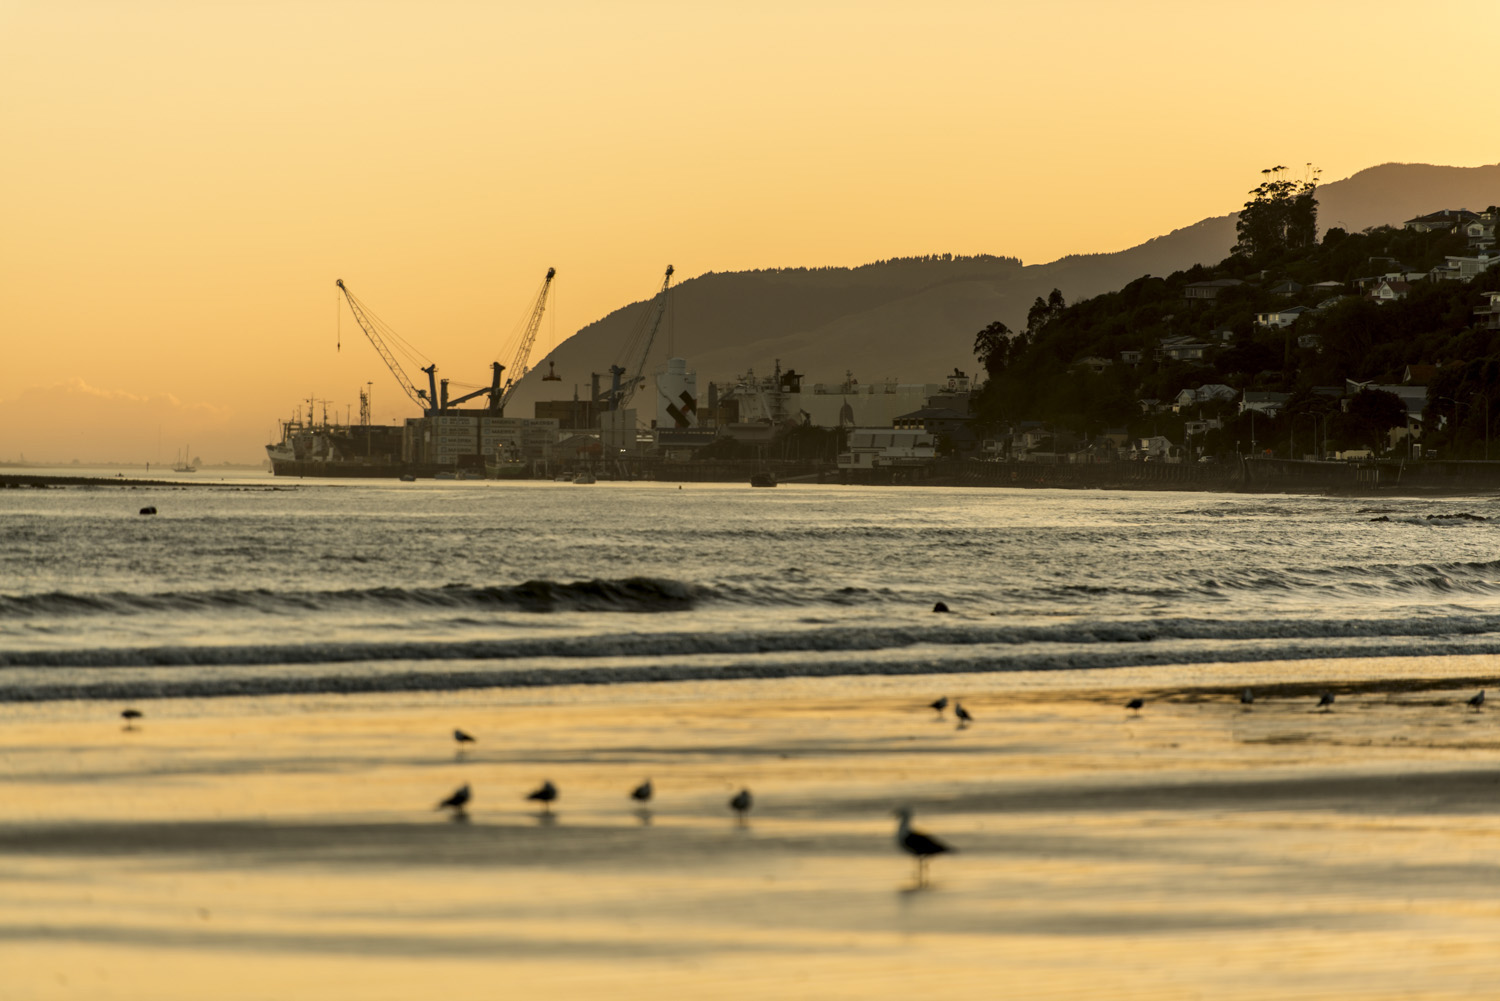 image of AARONTAIT COPYRIGHTED 2014 275 DOCUMENTARY PHOTOGRAPHER NEW ZEALAND EDITORIAL REPORTAGE CUSTOMER ENVIRONMENTAL HUMAN RESOURCES INTERVIEW REAL NATURAL LIGHT BEACH HARBOUR PORT SEAGULLS SUNRISE ENVIRONM